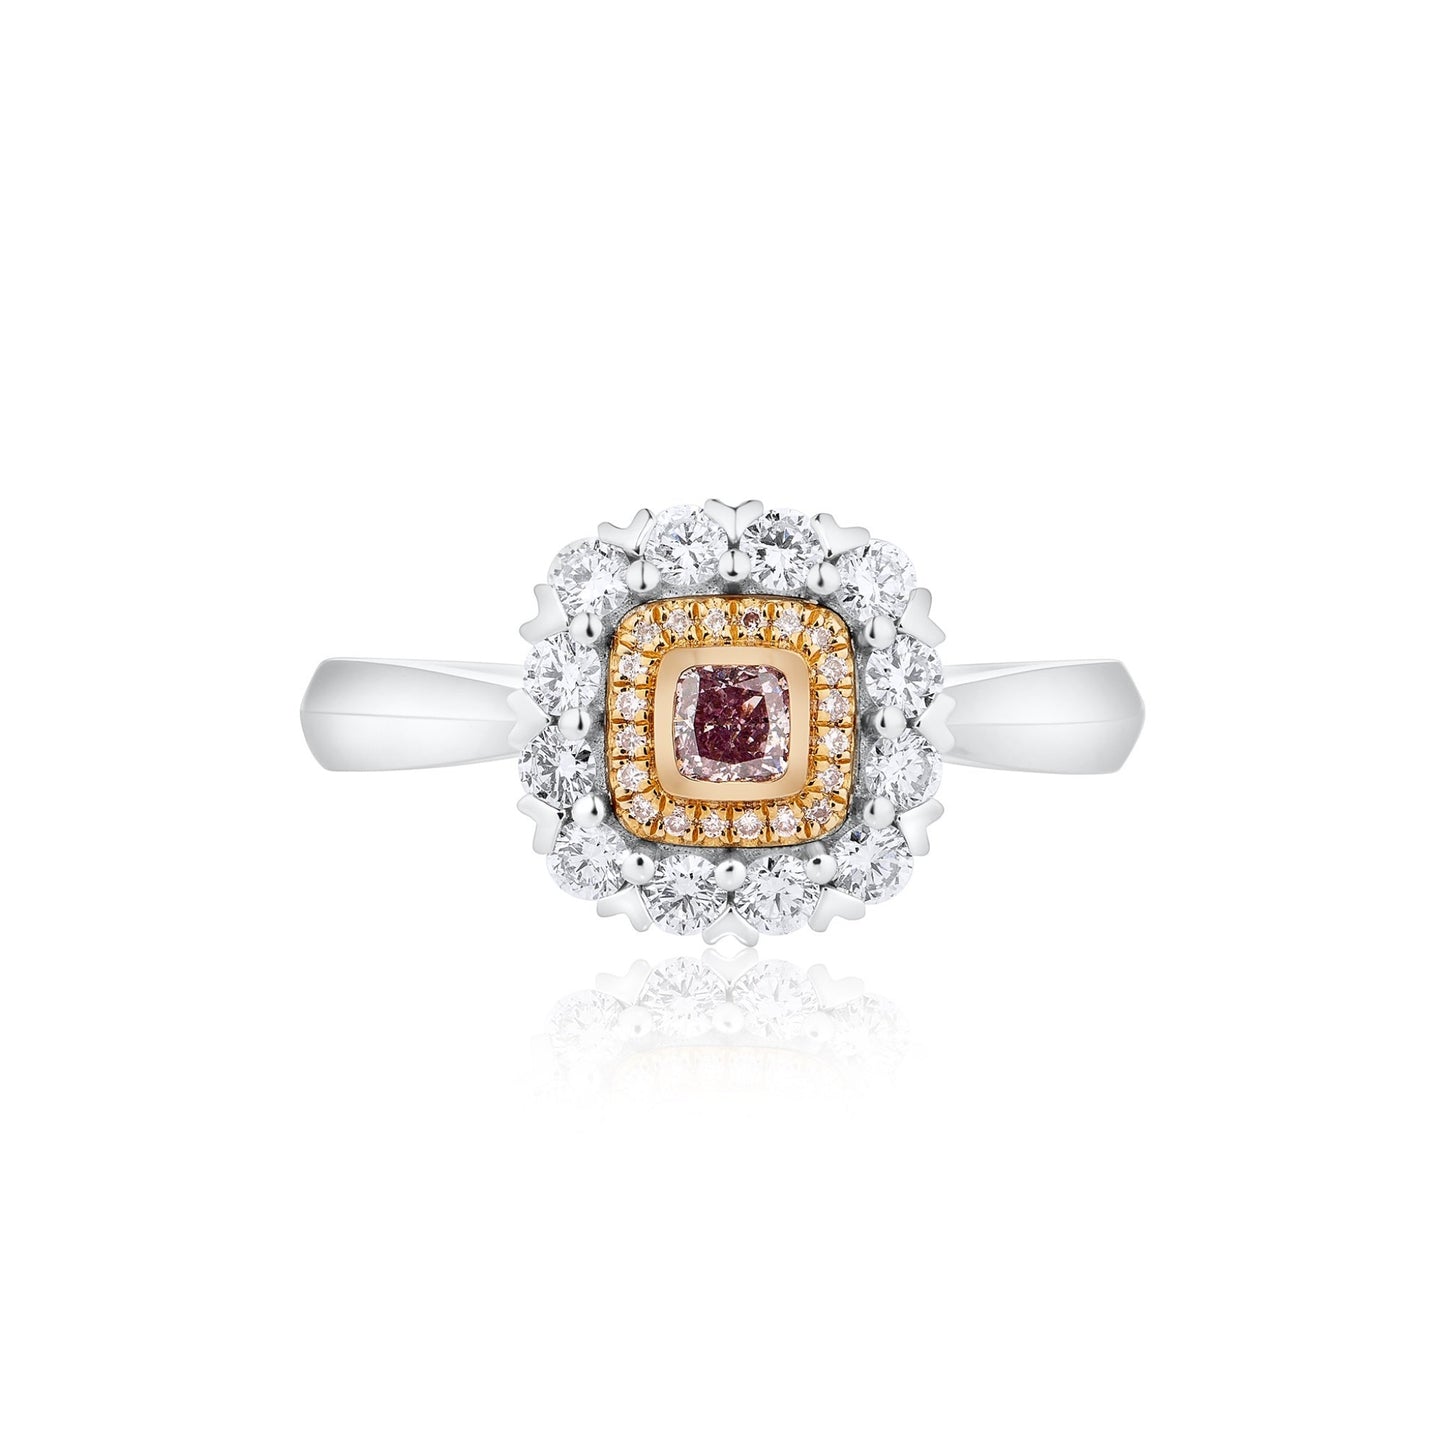 Cushion Pink Diamond With Double Halo In Pink & White Diamonds | 18ct White & Rose Gold